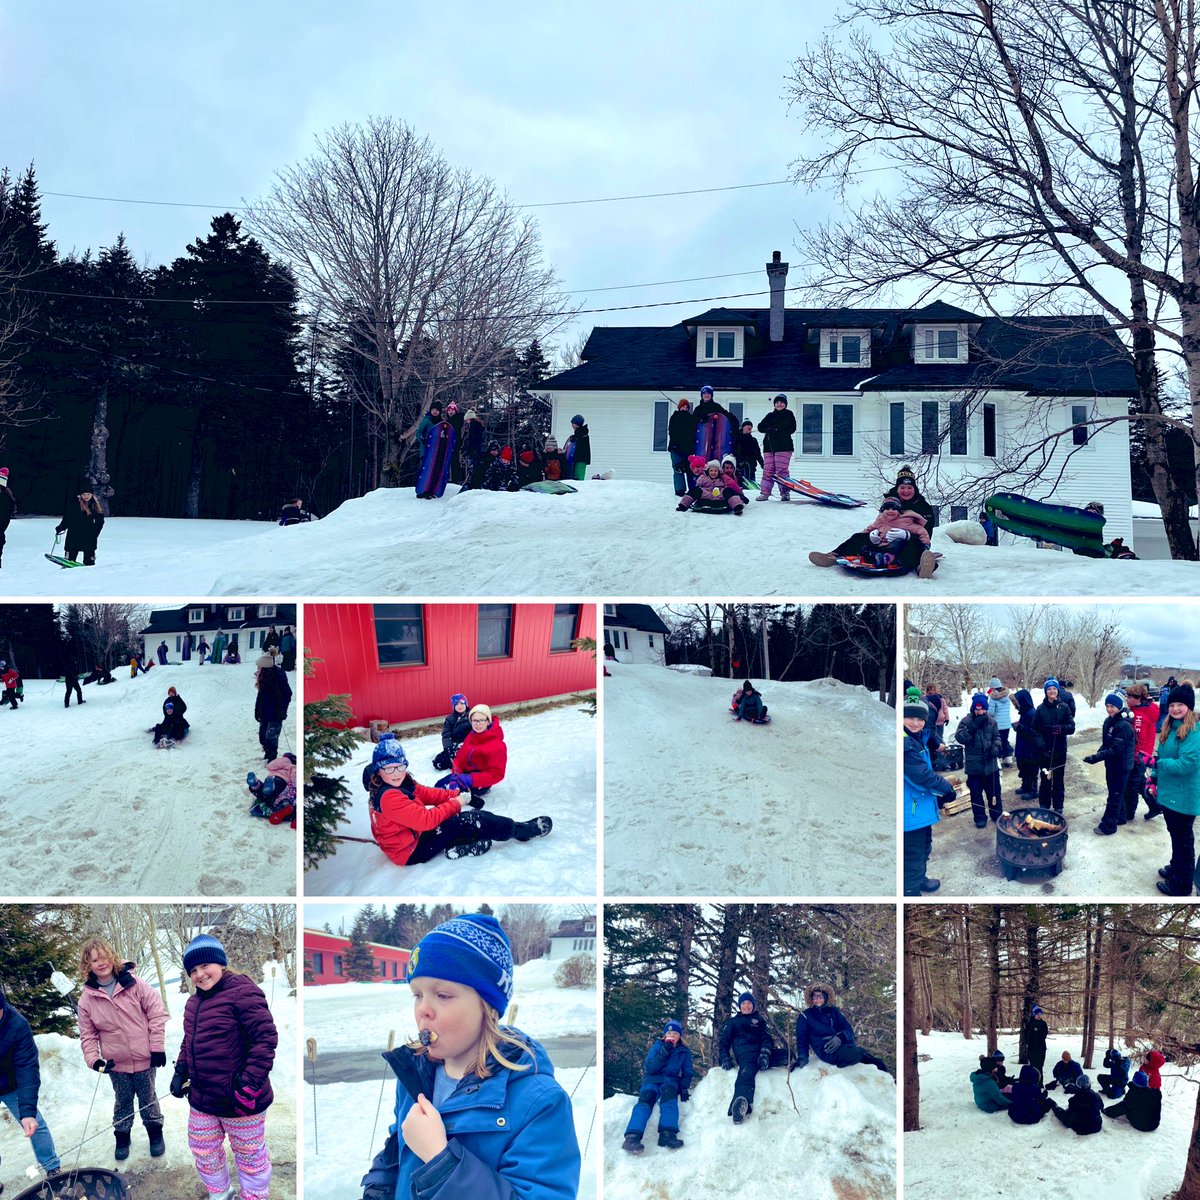 Definitely some core memories created today at our @SFOAschool #WinterCarnival 💙❄️